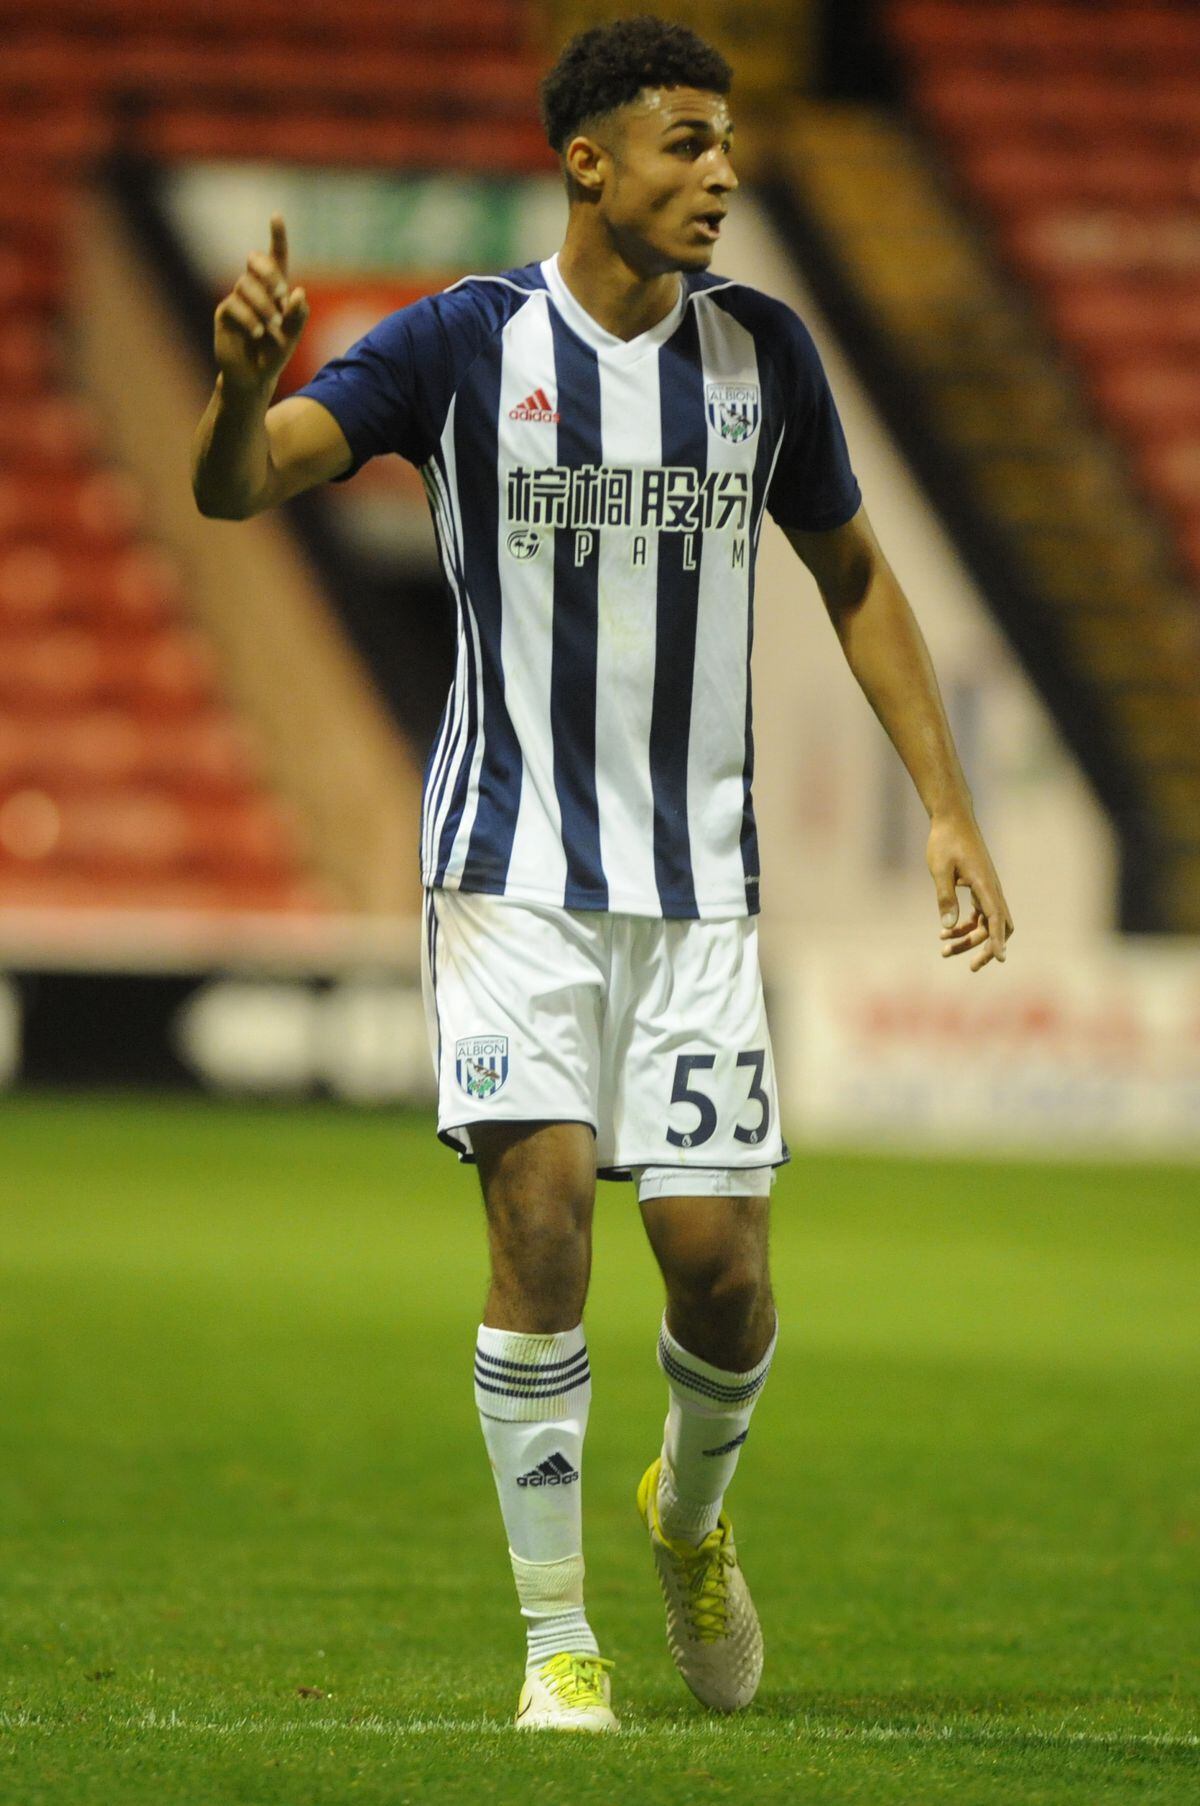 Max Melbourne playing for West Brom.